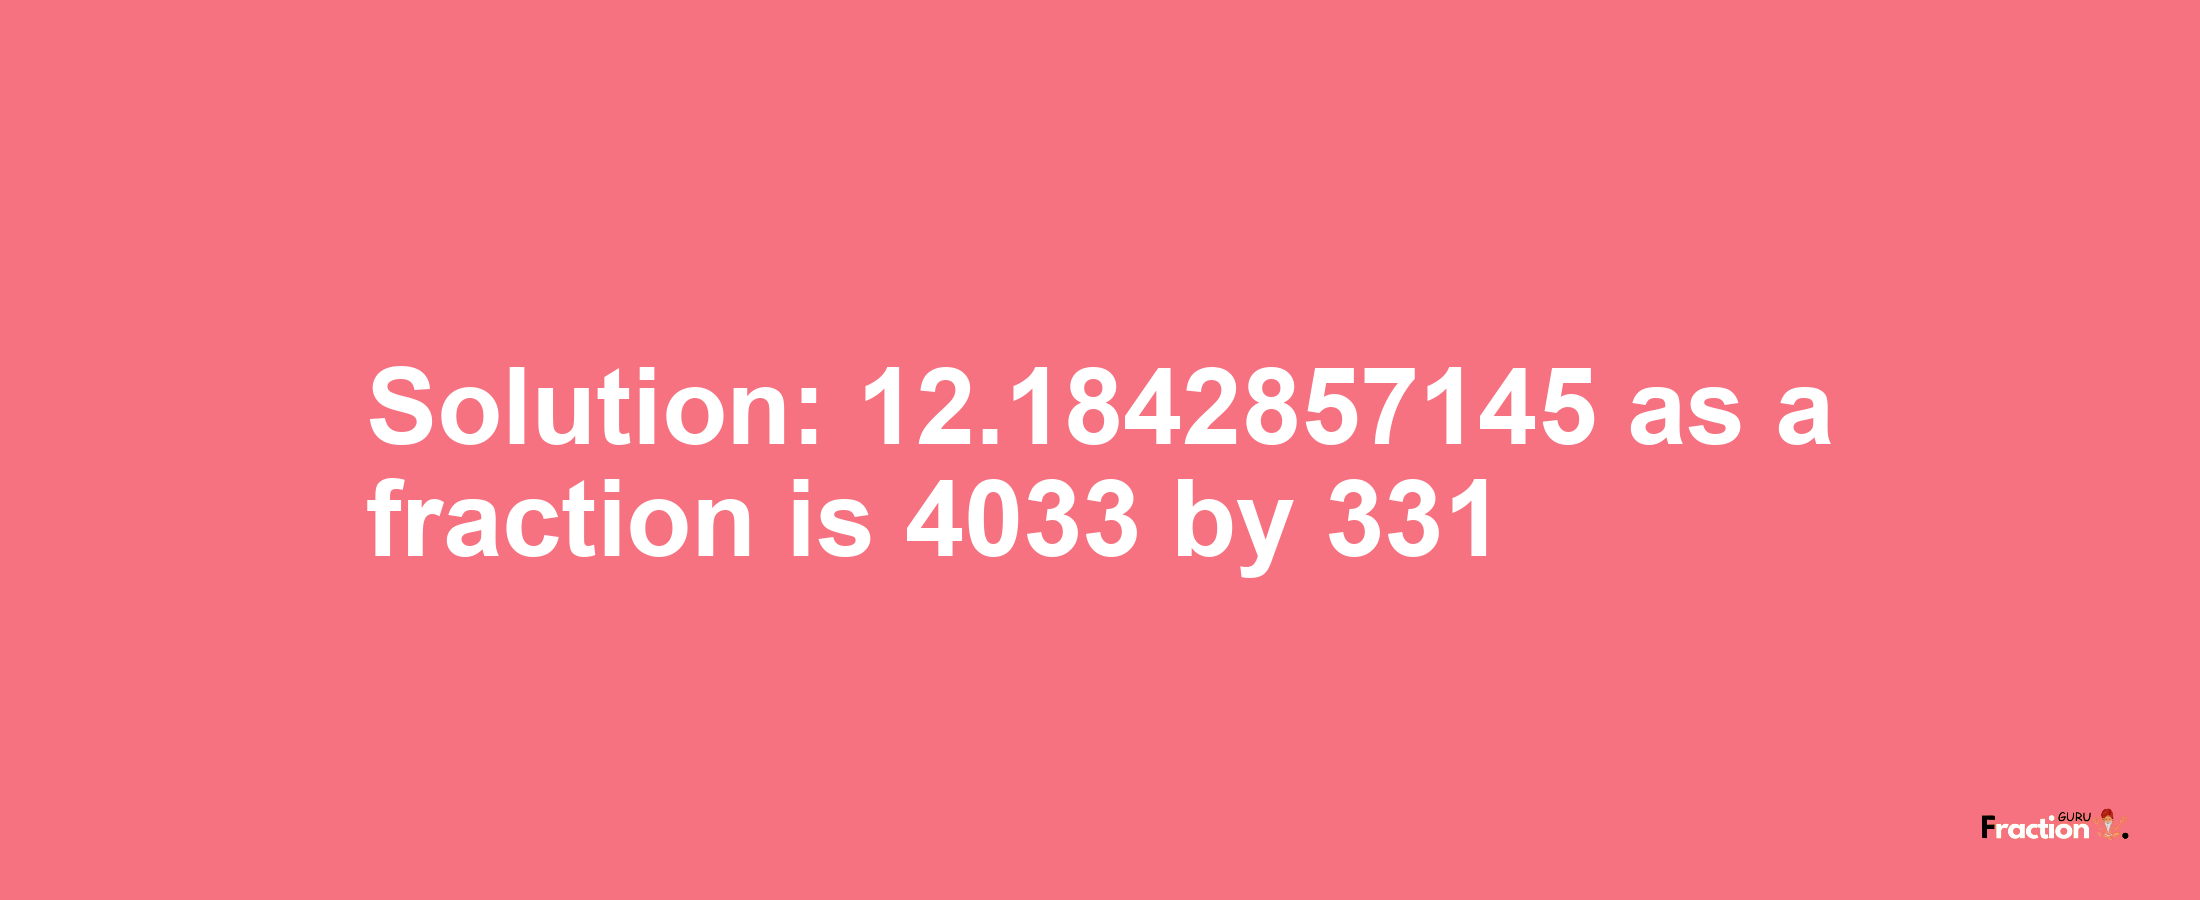 Solution:12.1842857145 as a fraction is 4033/331